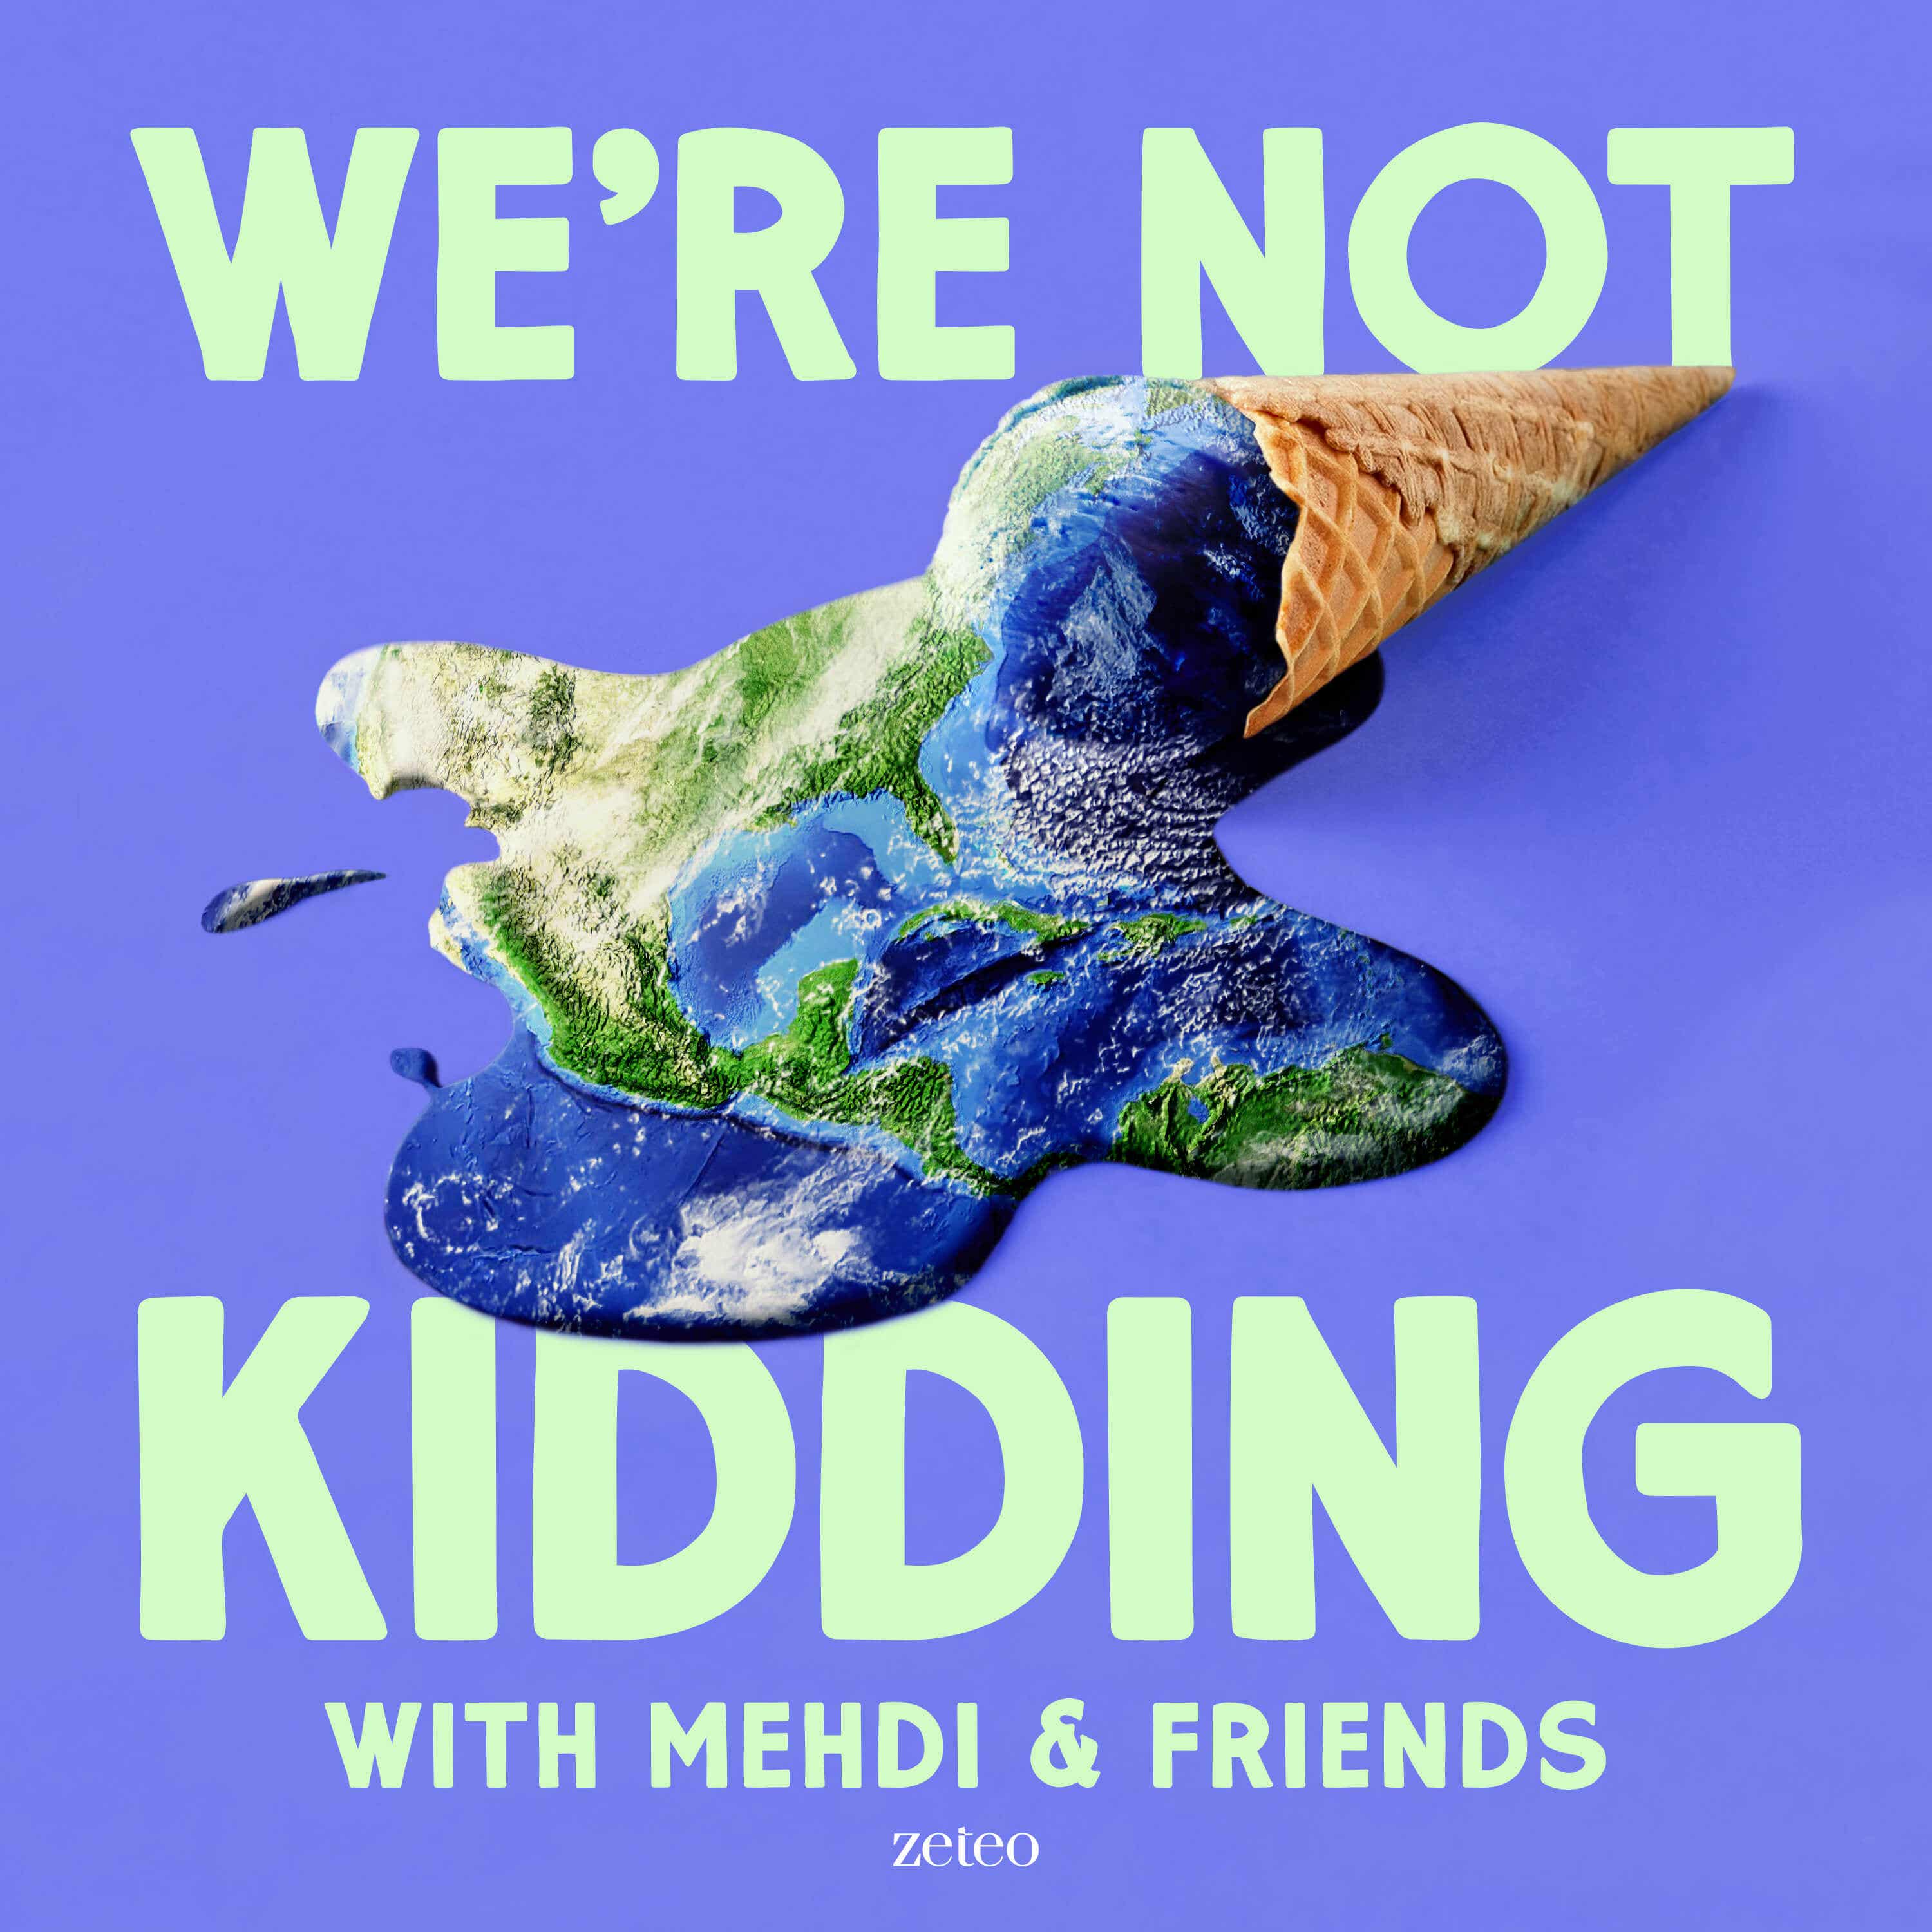 Were Not Kidding with Mehdi & Friends